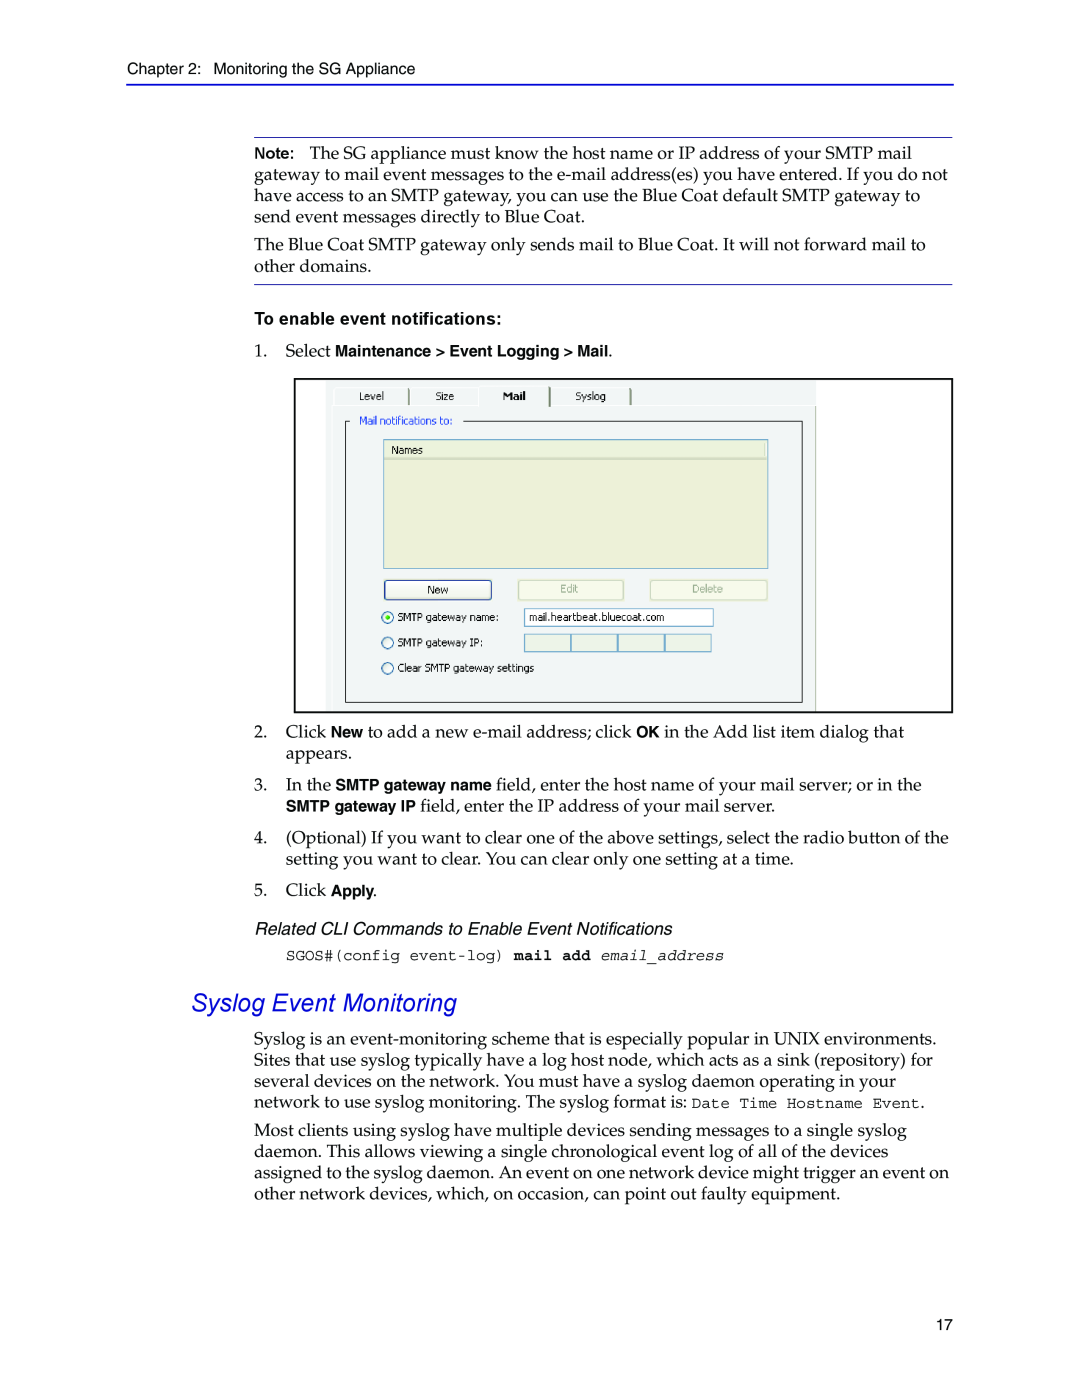 Blue Coat Systems Blue Coat Systems SG Appliance manual Syslog Event Monitoring, To enable event notifications 